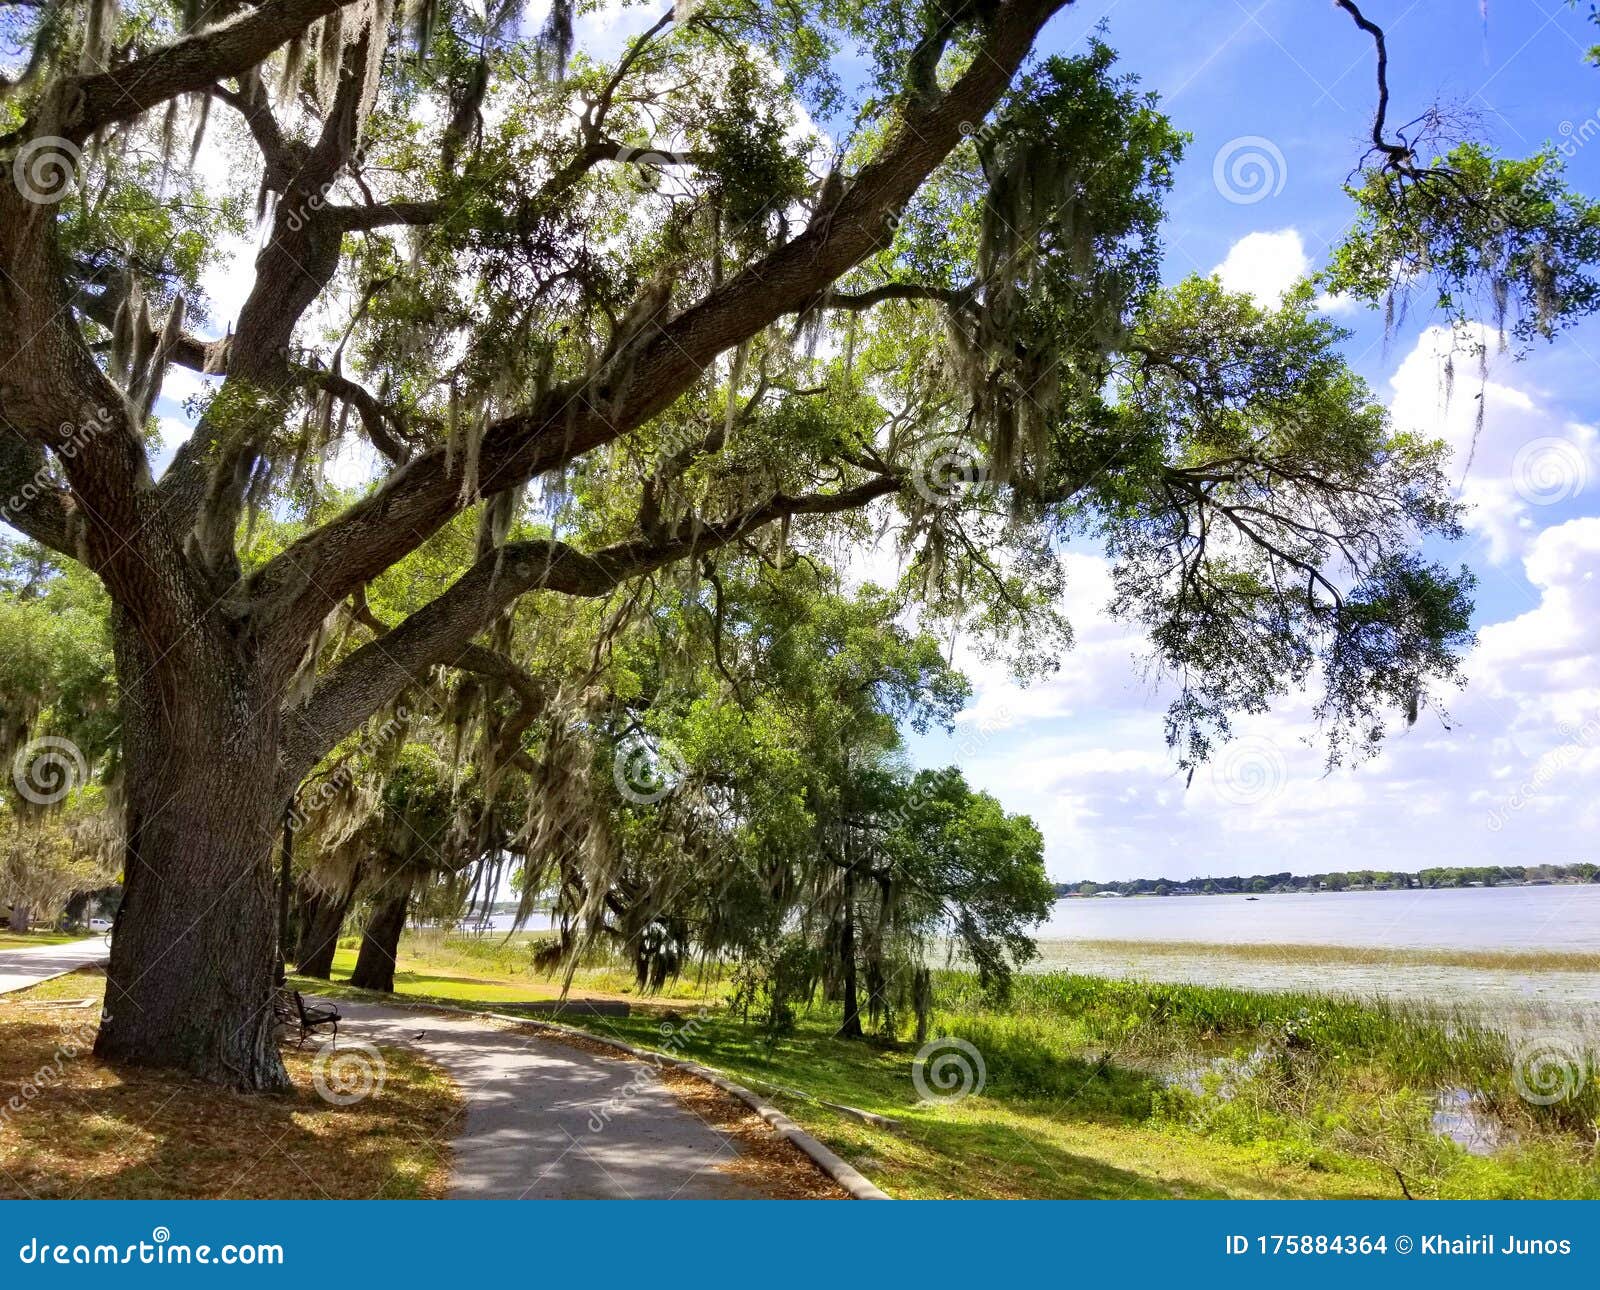 an oak tree with moss by the lake near heritage park, winter haven, florida, u.s.a